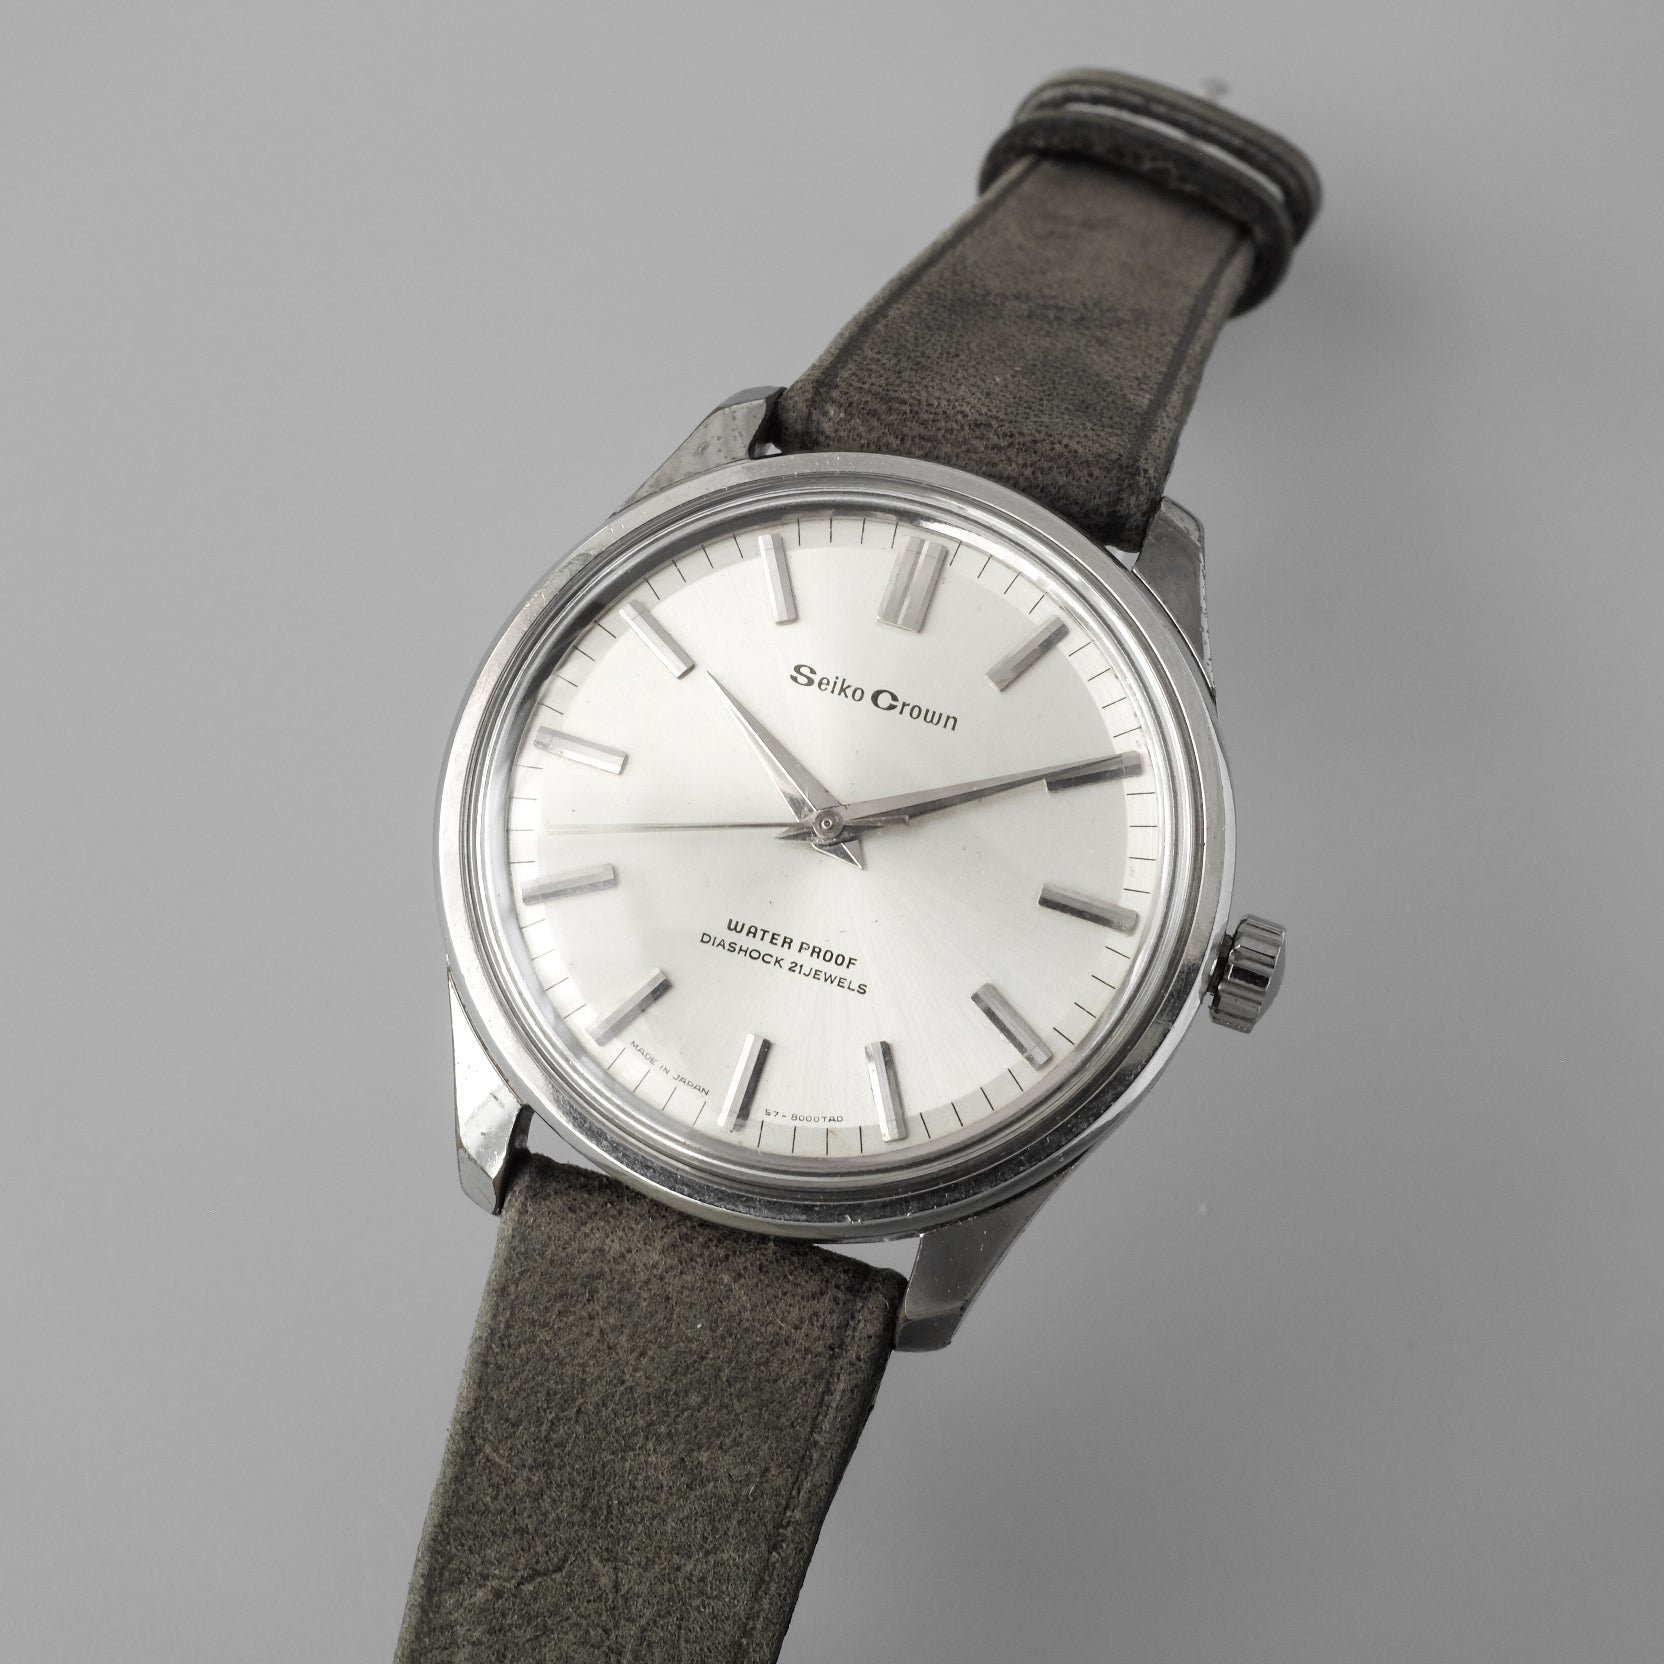 Seiko Crown 57-8000 from 1964